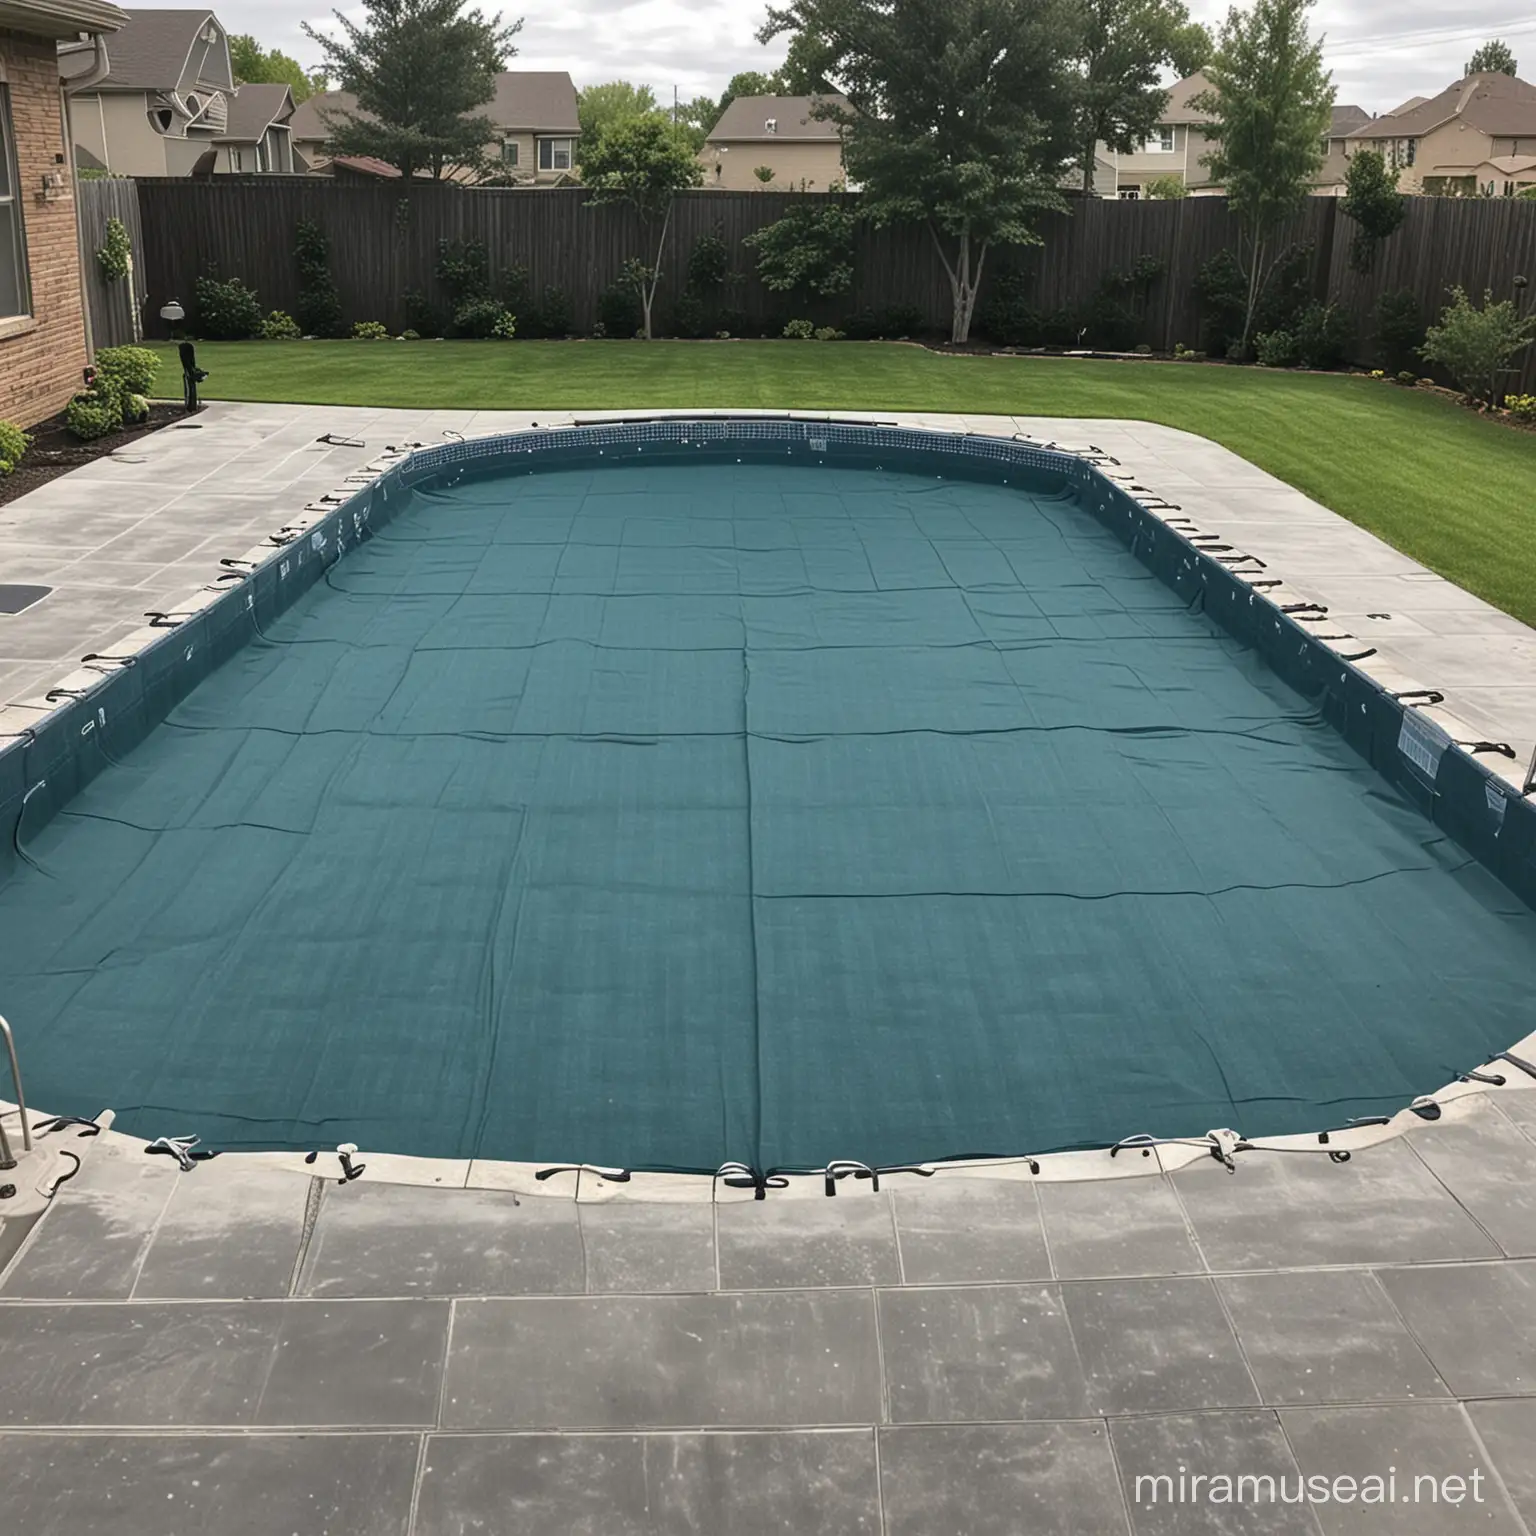 HighQuality Inground Pool Cover Protecting Pool from Debris and Elements